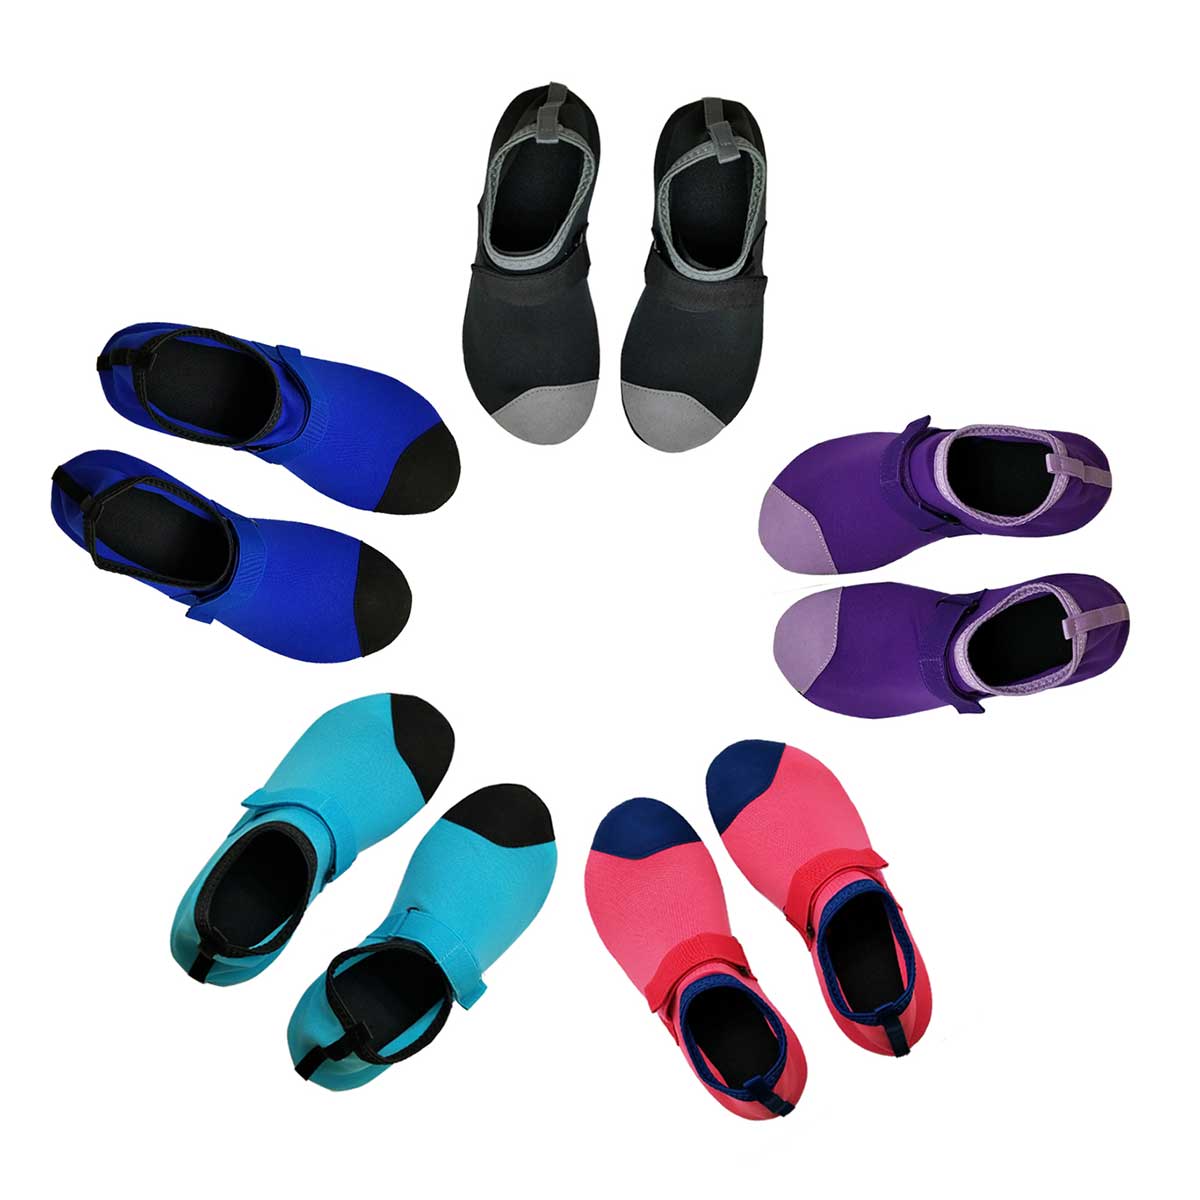 Wholesale Water Sport Shoes Package Deal (48 Pairs)